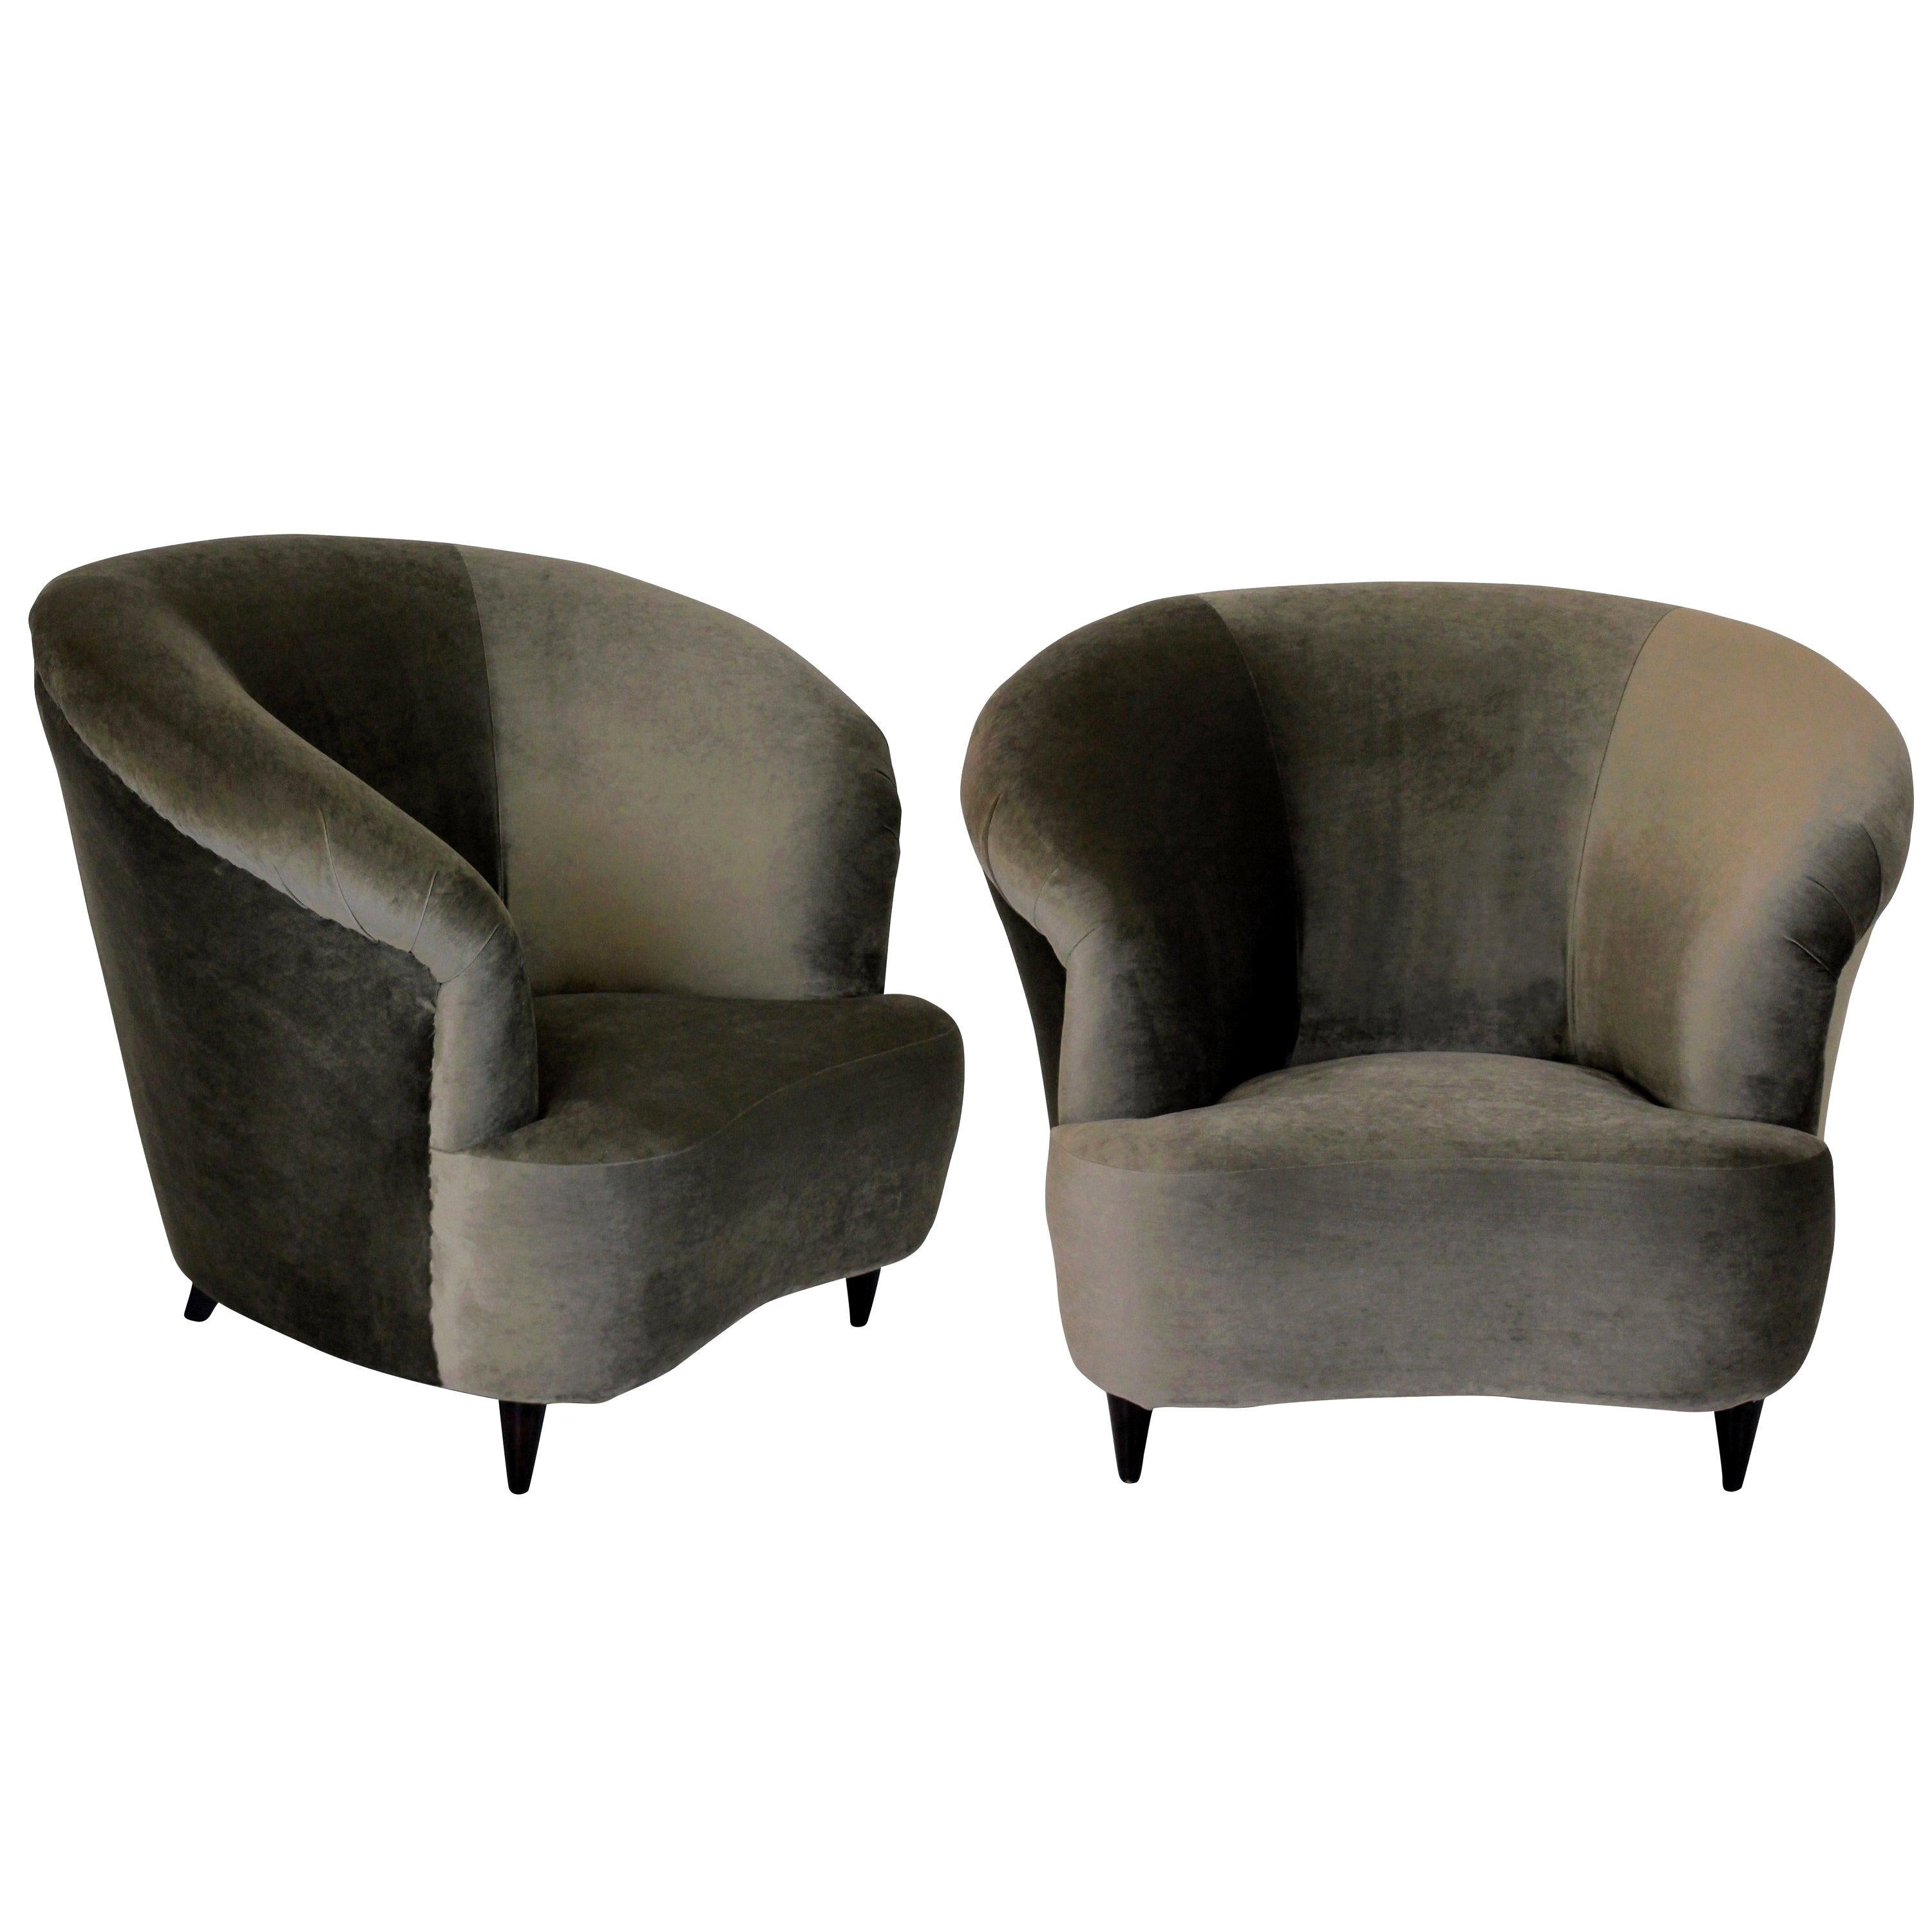 Pair of Super Comfortable Lounge Chairs by Parisi